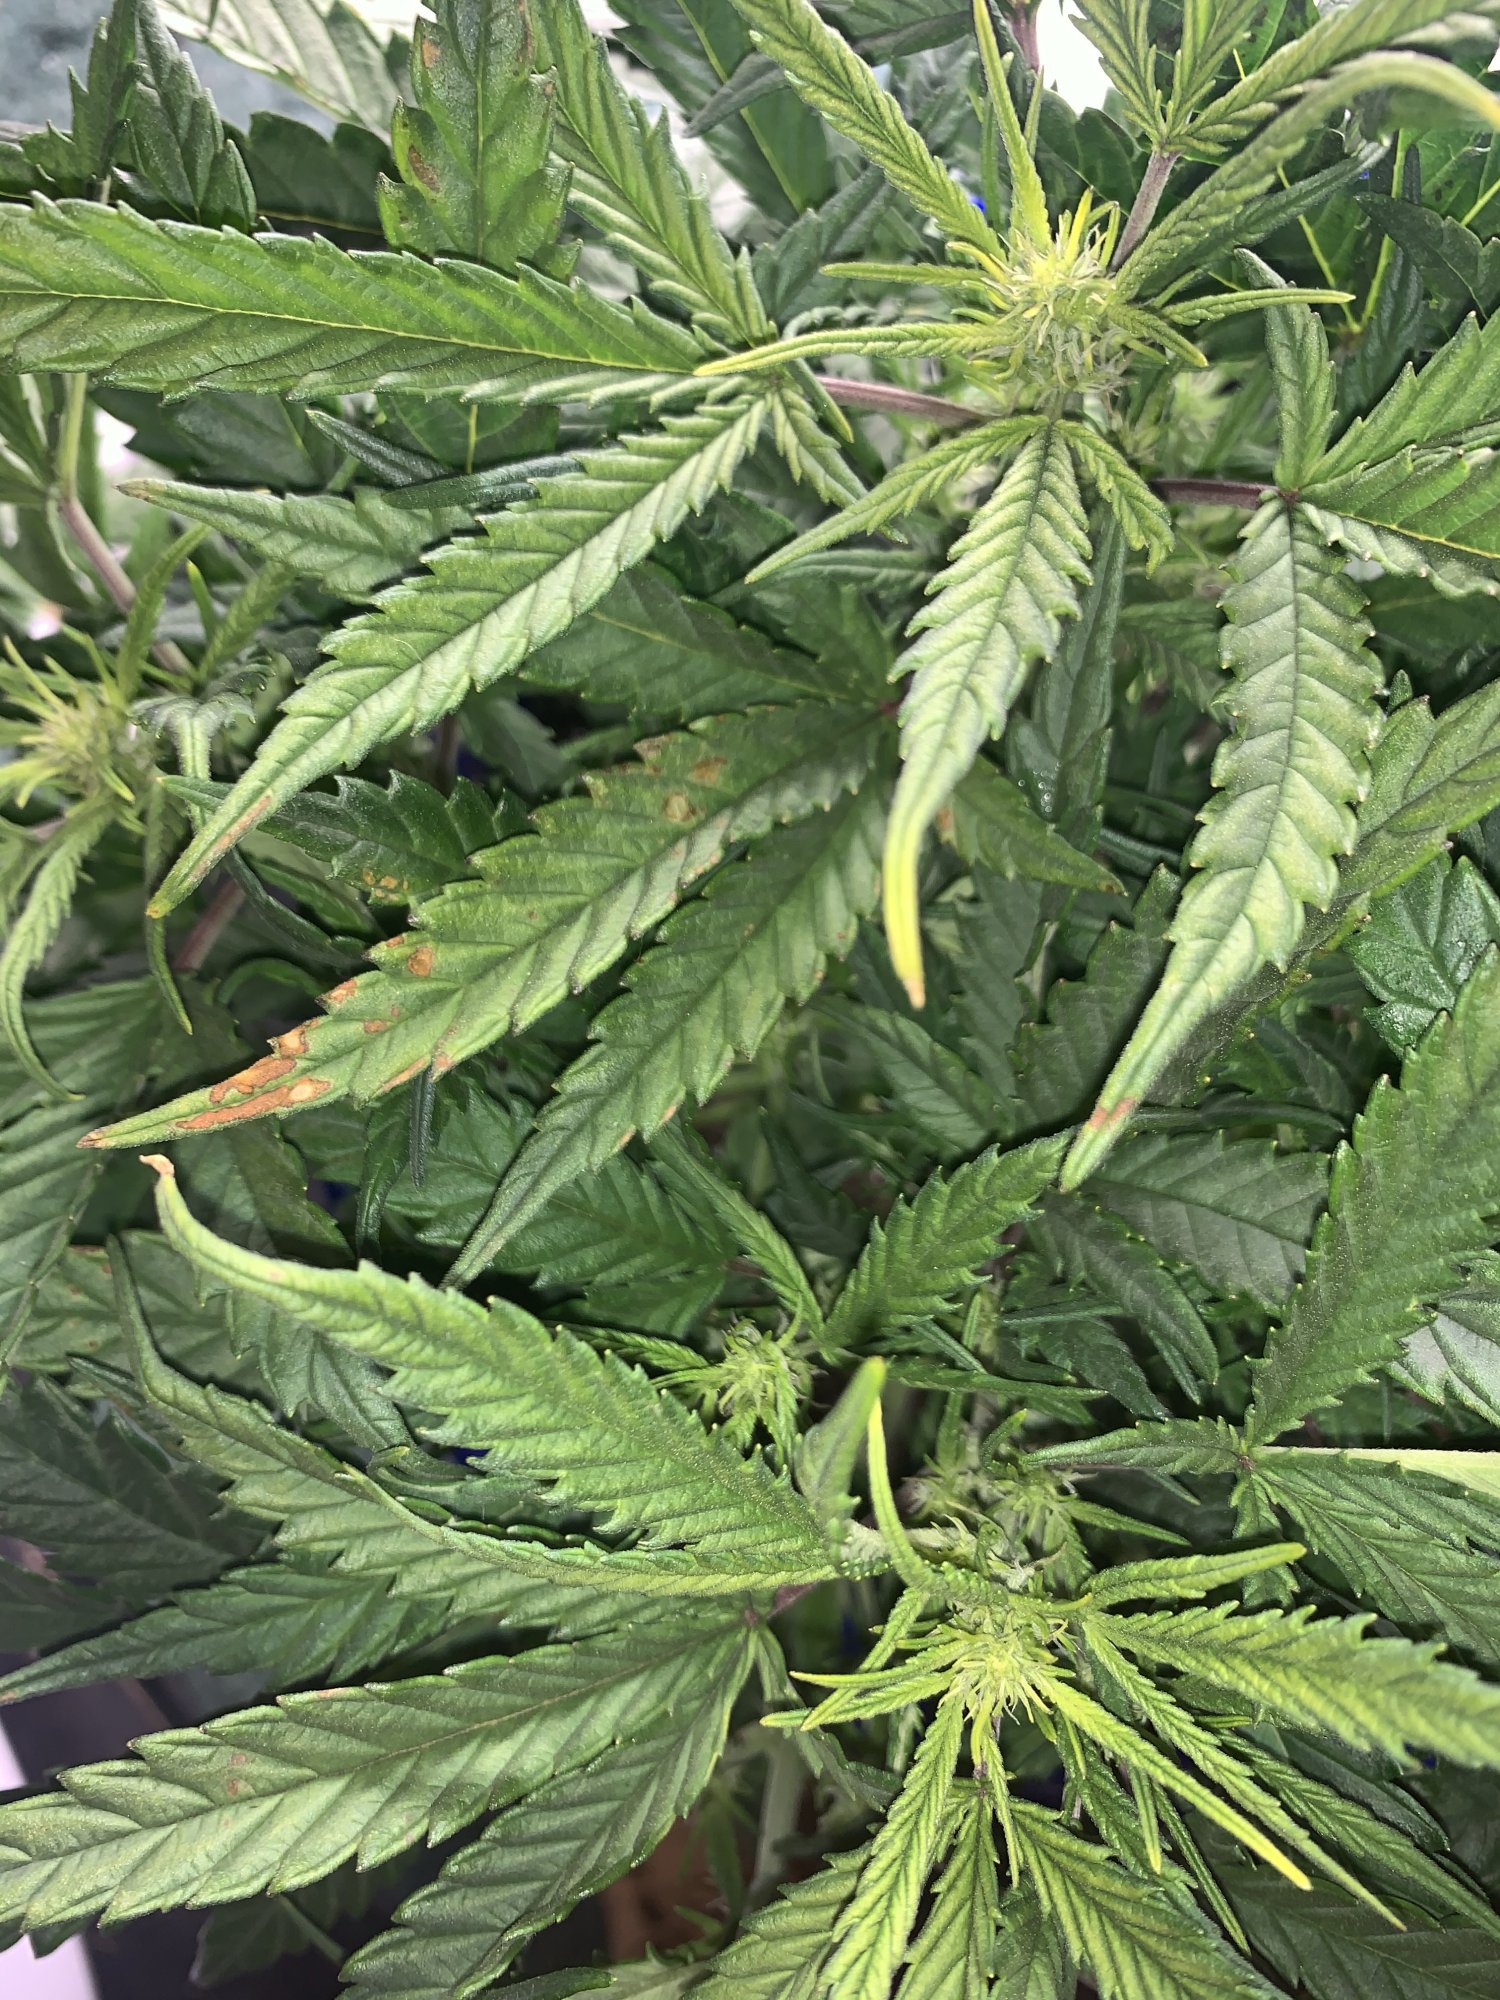 Needing some help first time ever growing anything lol 8